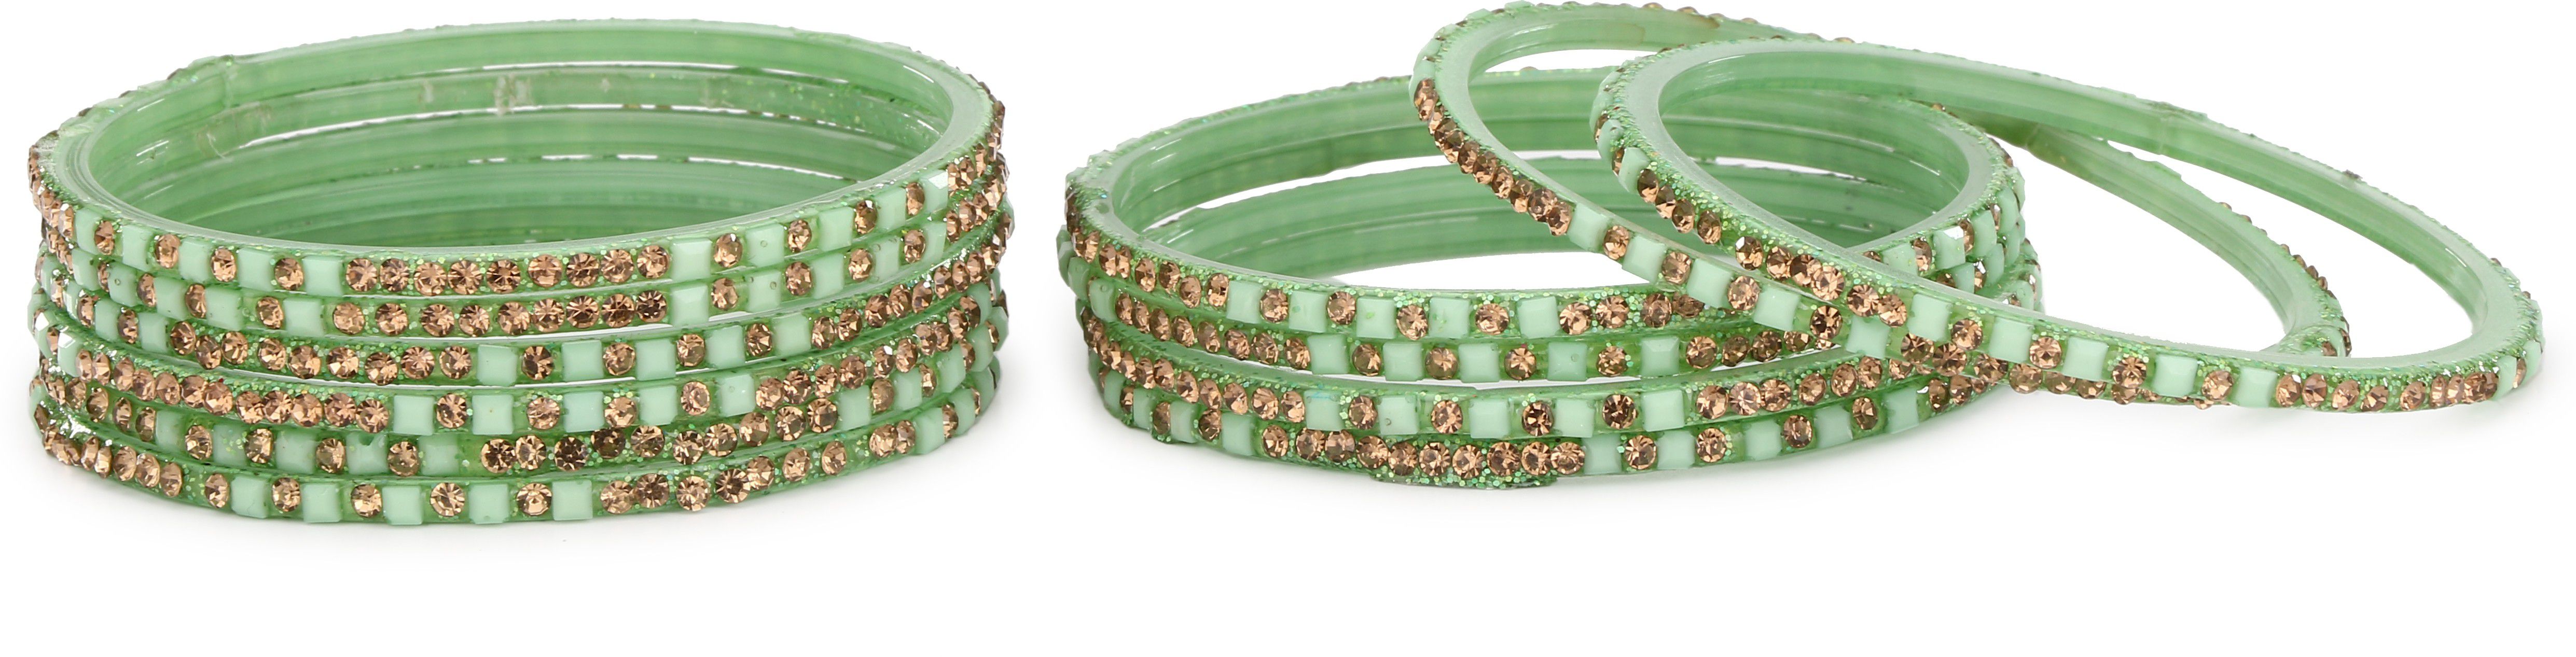     			Somil Hand Decorative Traditional/ Fashionable Glass Bangle Set Ornamented With Colorful Beads For Stylish Attractive Look (Pack Of 12) Green_2.6